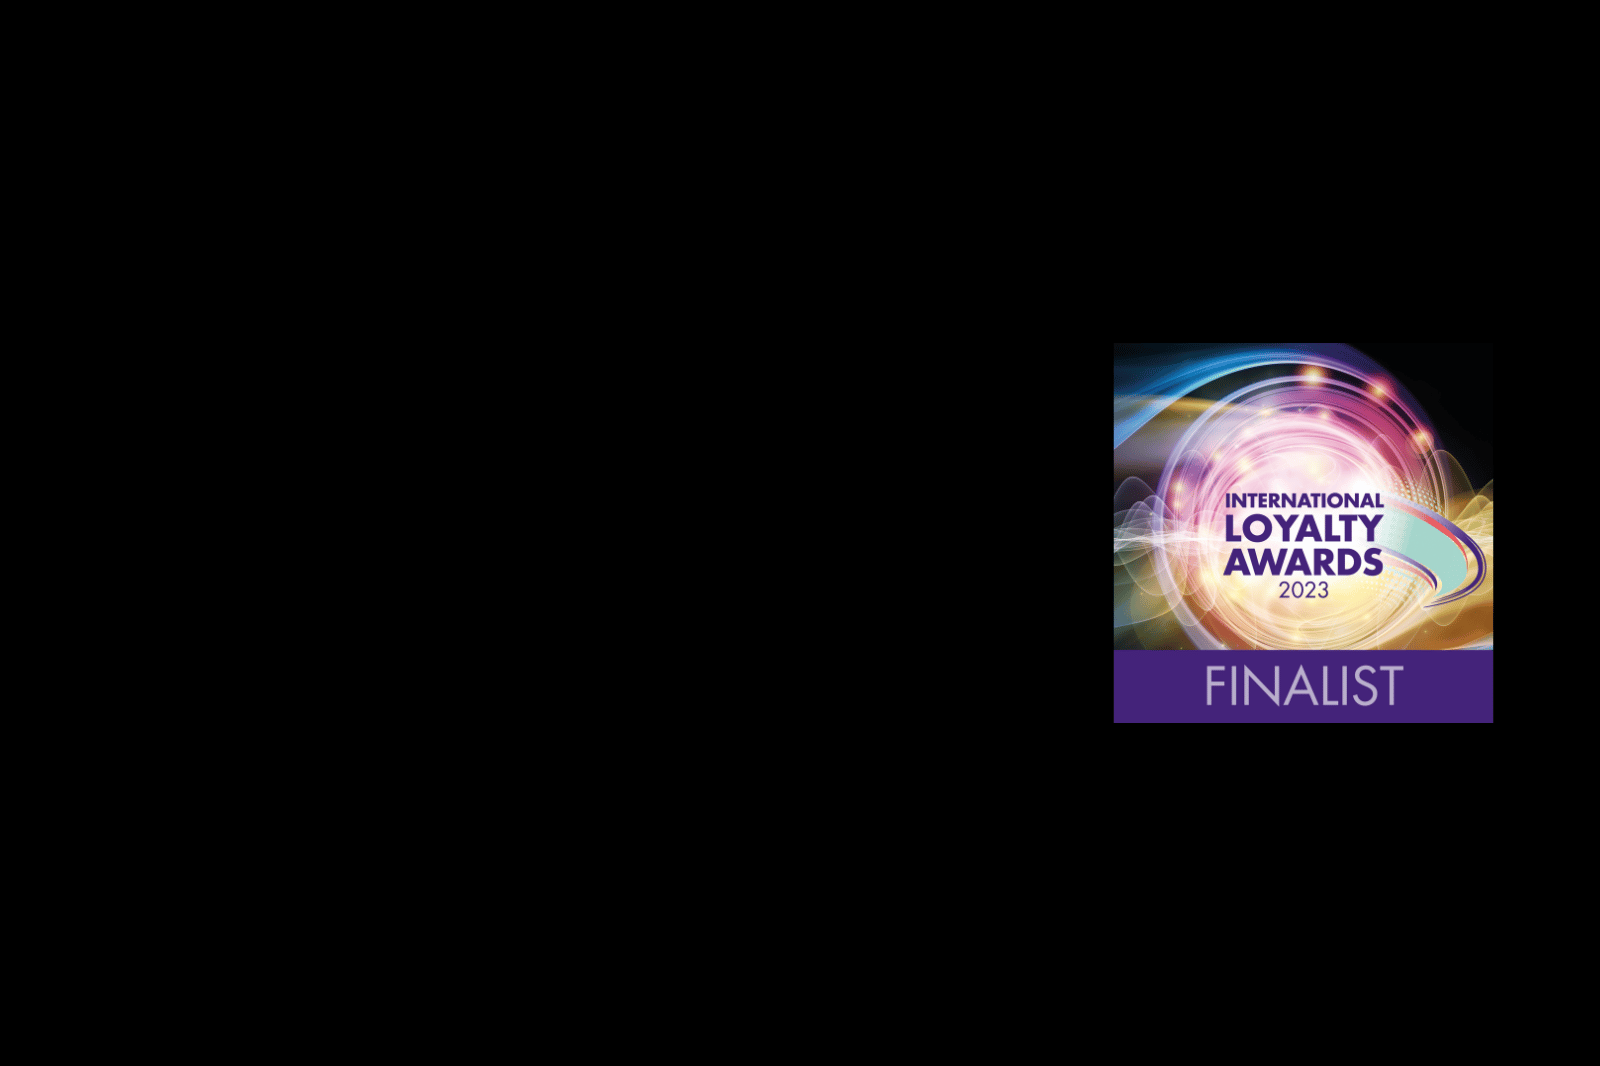 The logo for the Double International Loyalty Awards is shown on a black background.